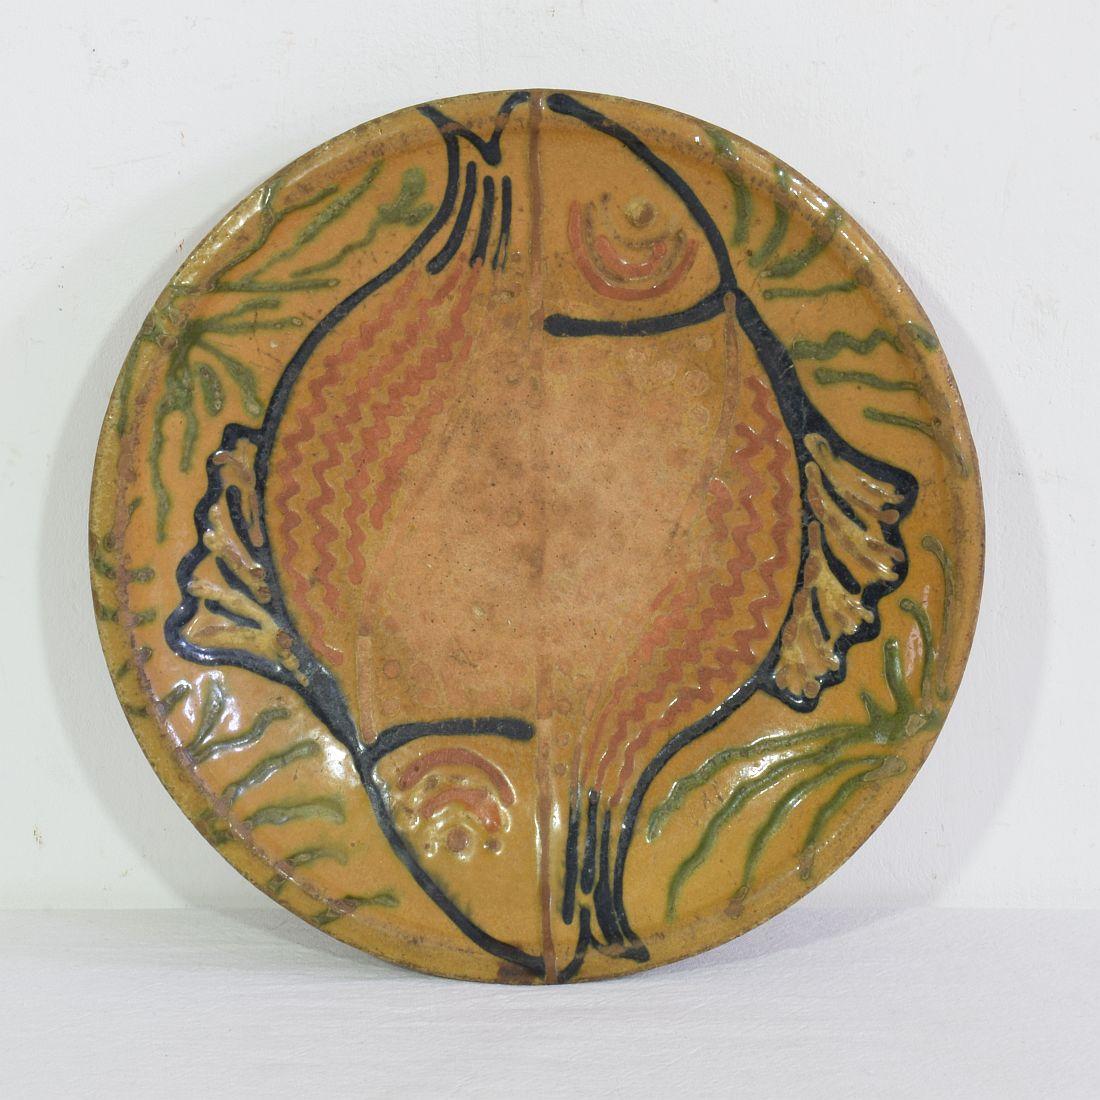 French 19th Century Glazed Folk Art Ceramic Platter/ Bowl Depicting Two Fish In Good Condition For Sale In Buisson, FR